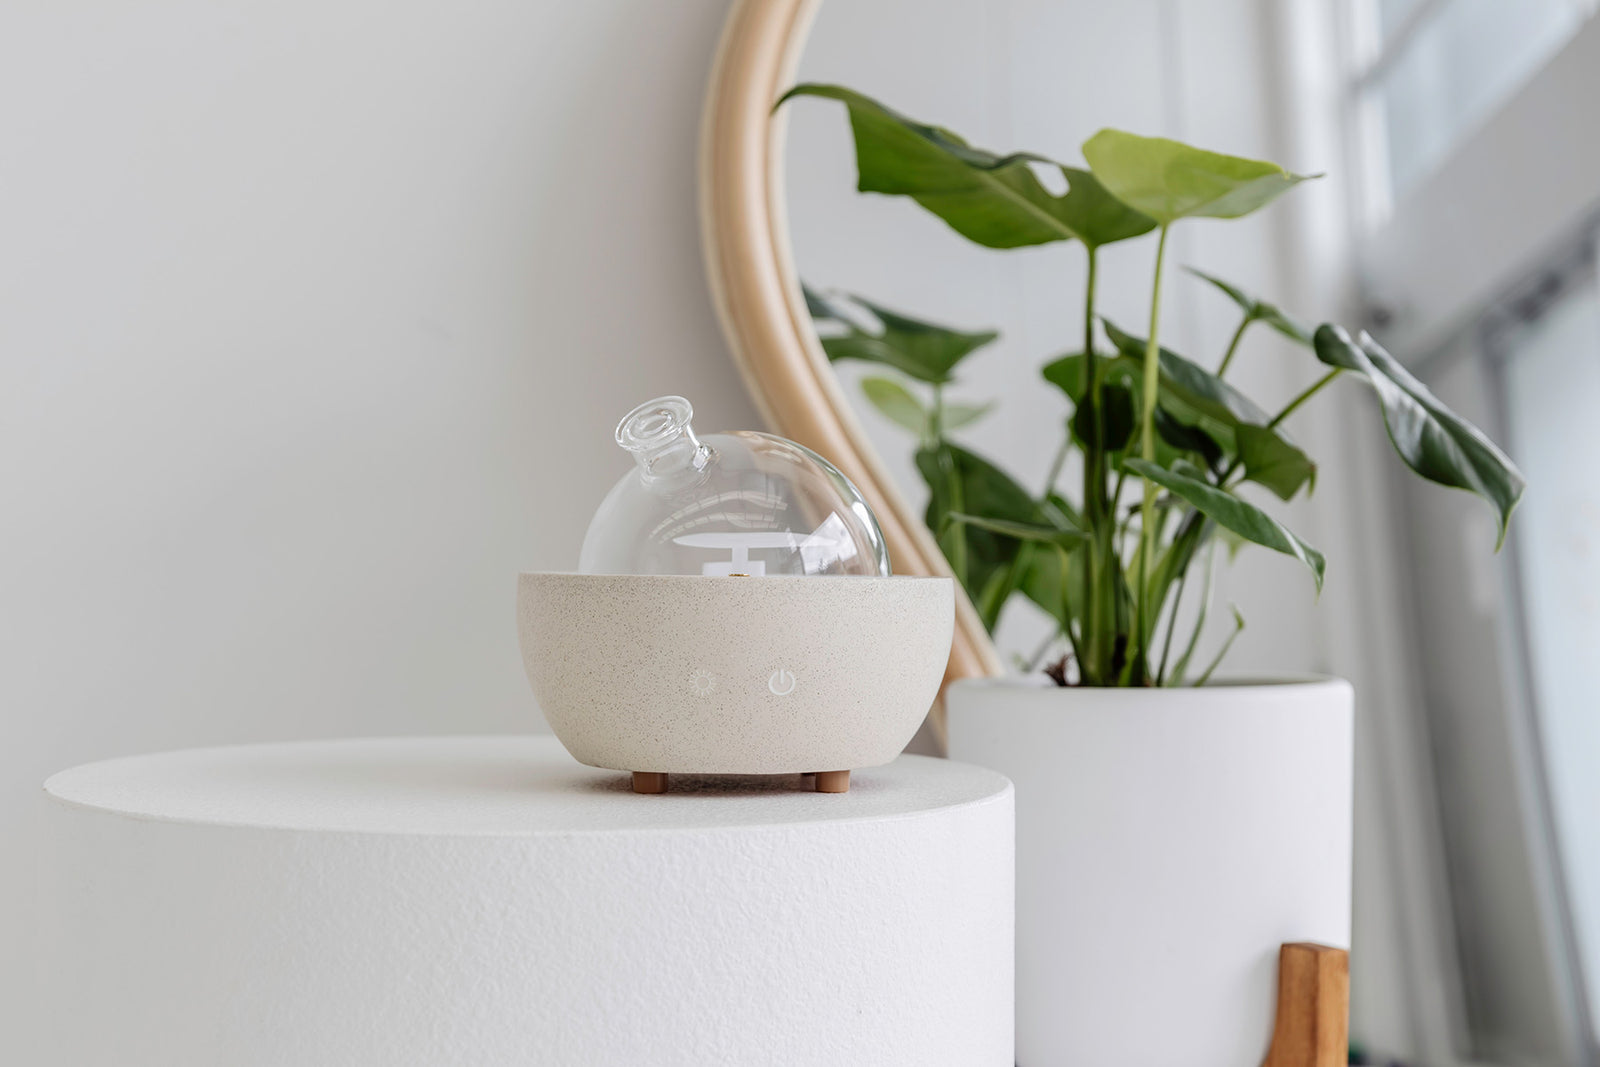 Oilly Vibes | Aesthetic diffuser home decor product